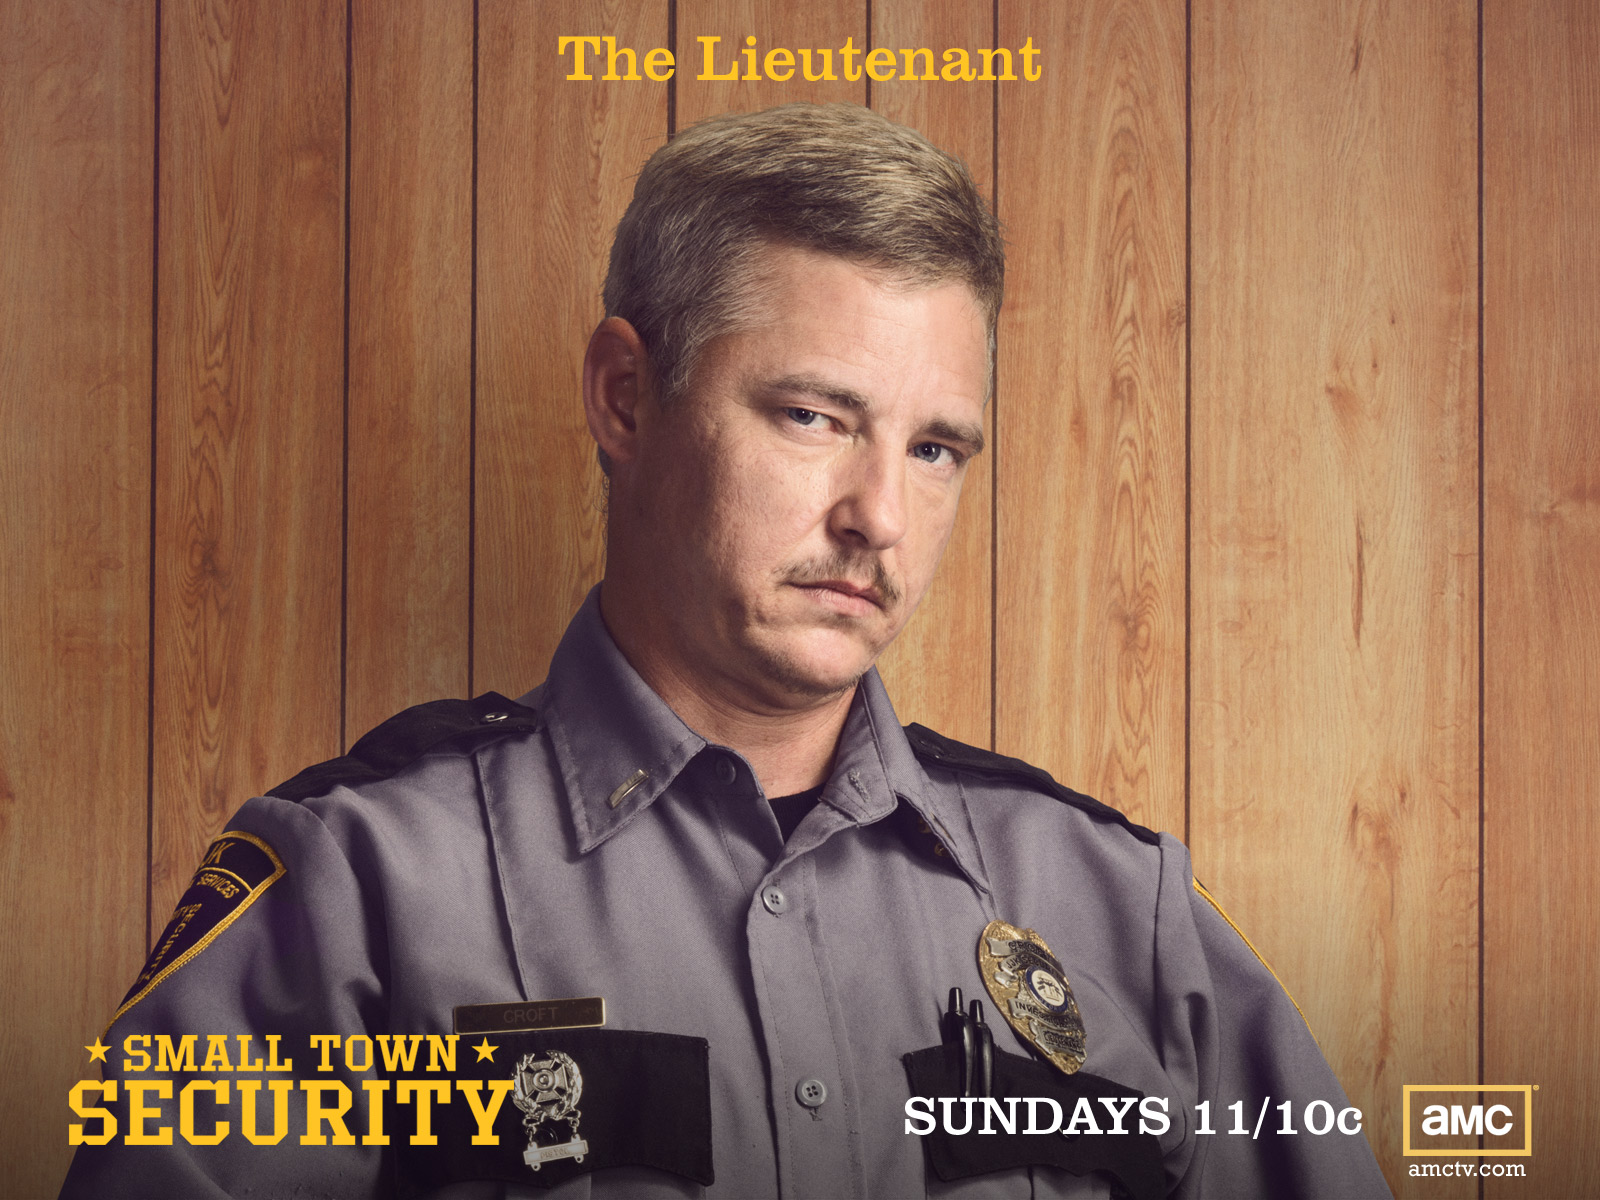 tv show, small town security, security